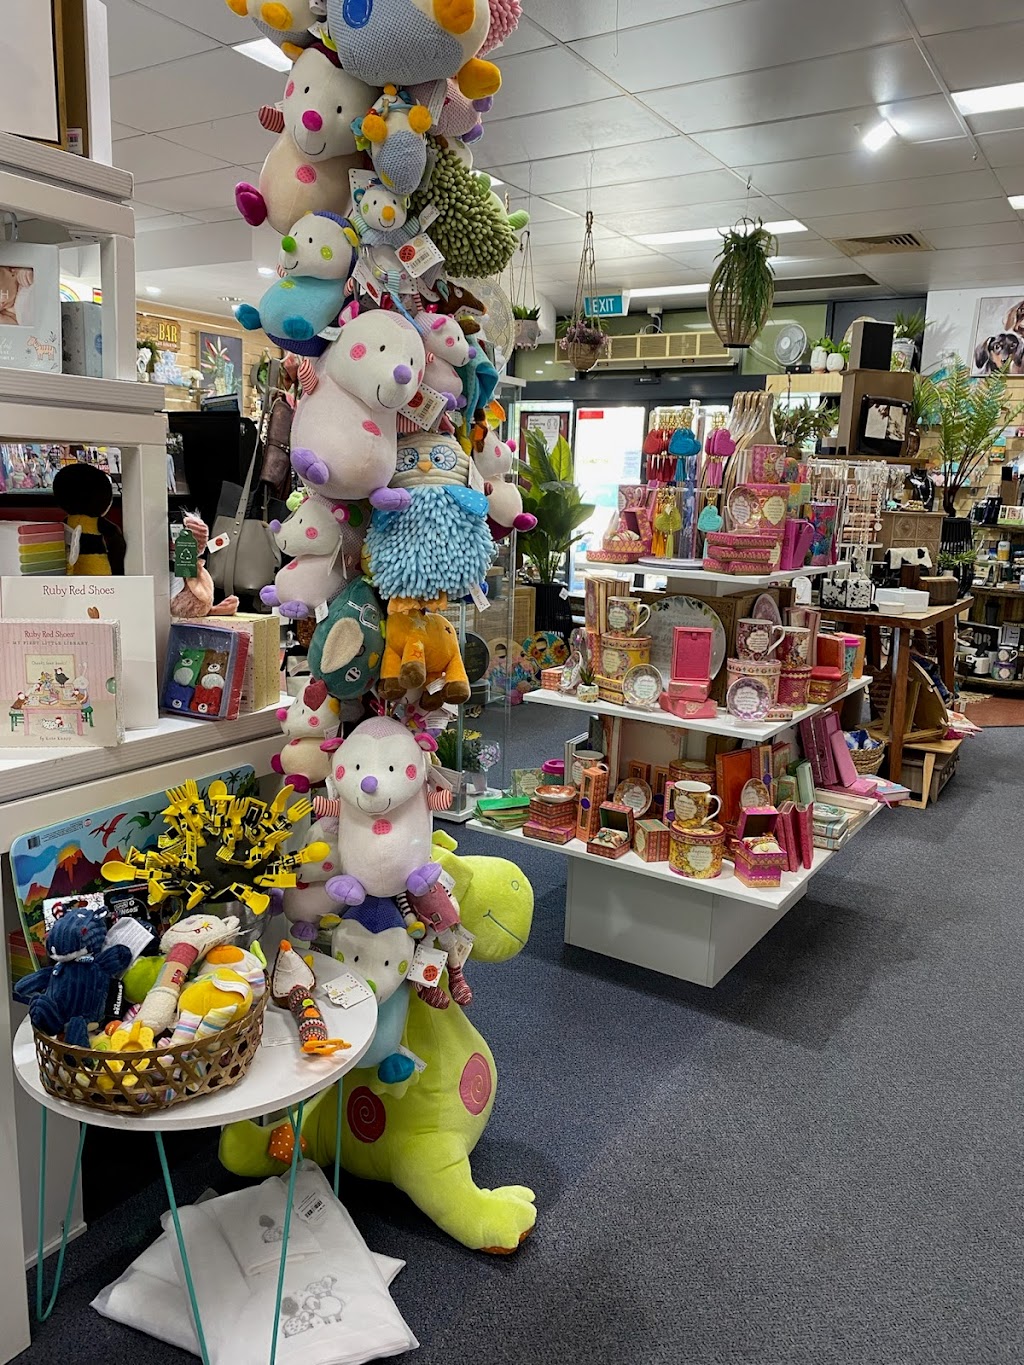 Glenmore News & Gifts | store | Shop 2/309-315 Farm St, Norman Gardens QLD 4701, Australia | 0749284960 OR +61 7 4928 4960